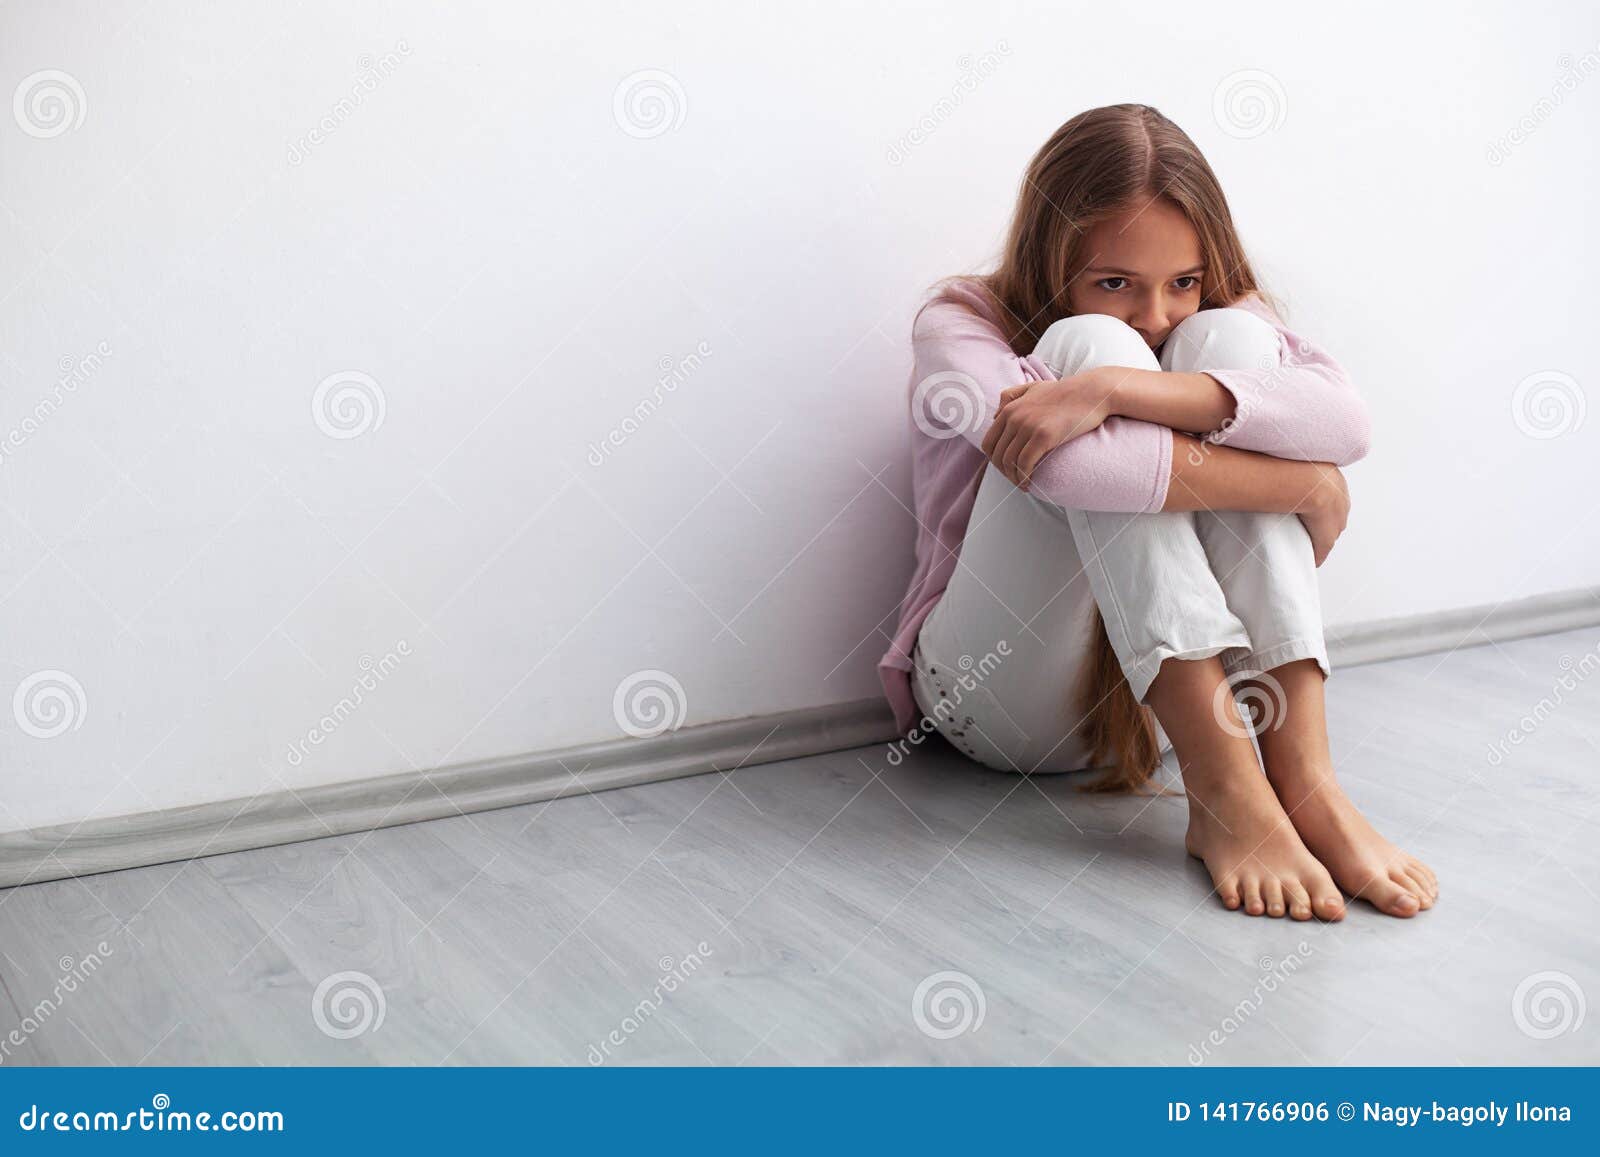 Young Worried Or Sad Girl Sitting On The Floor By The W